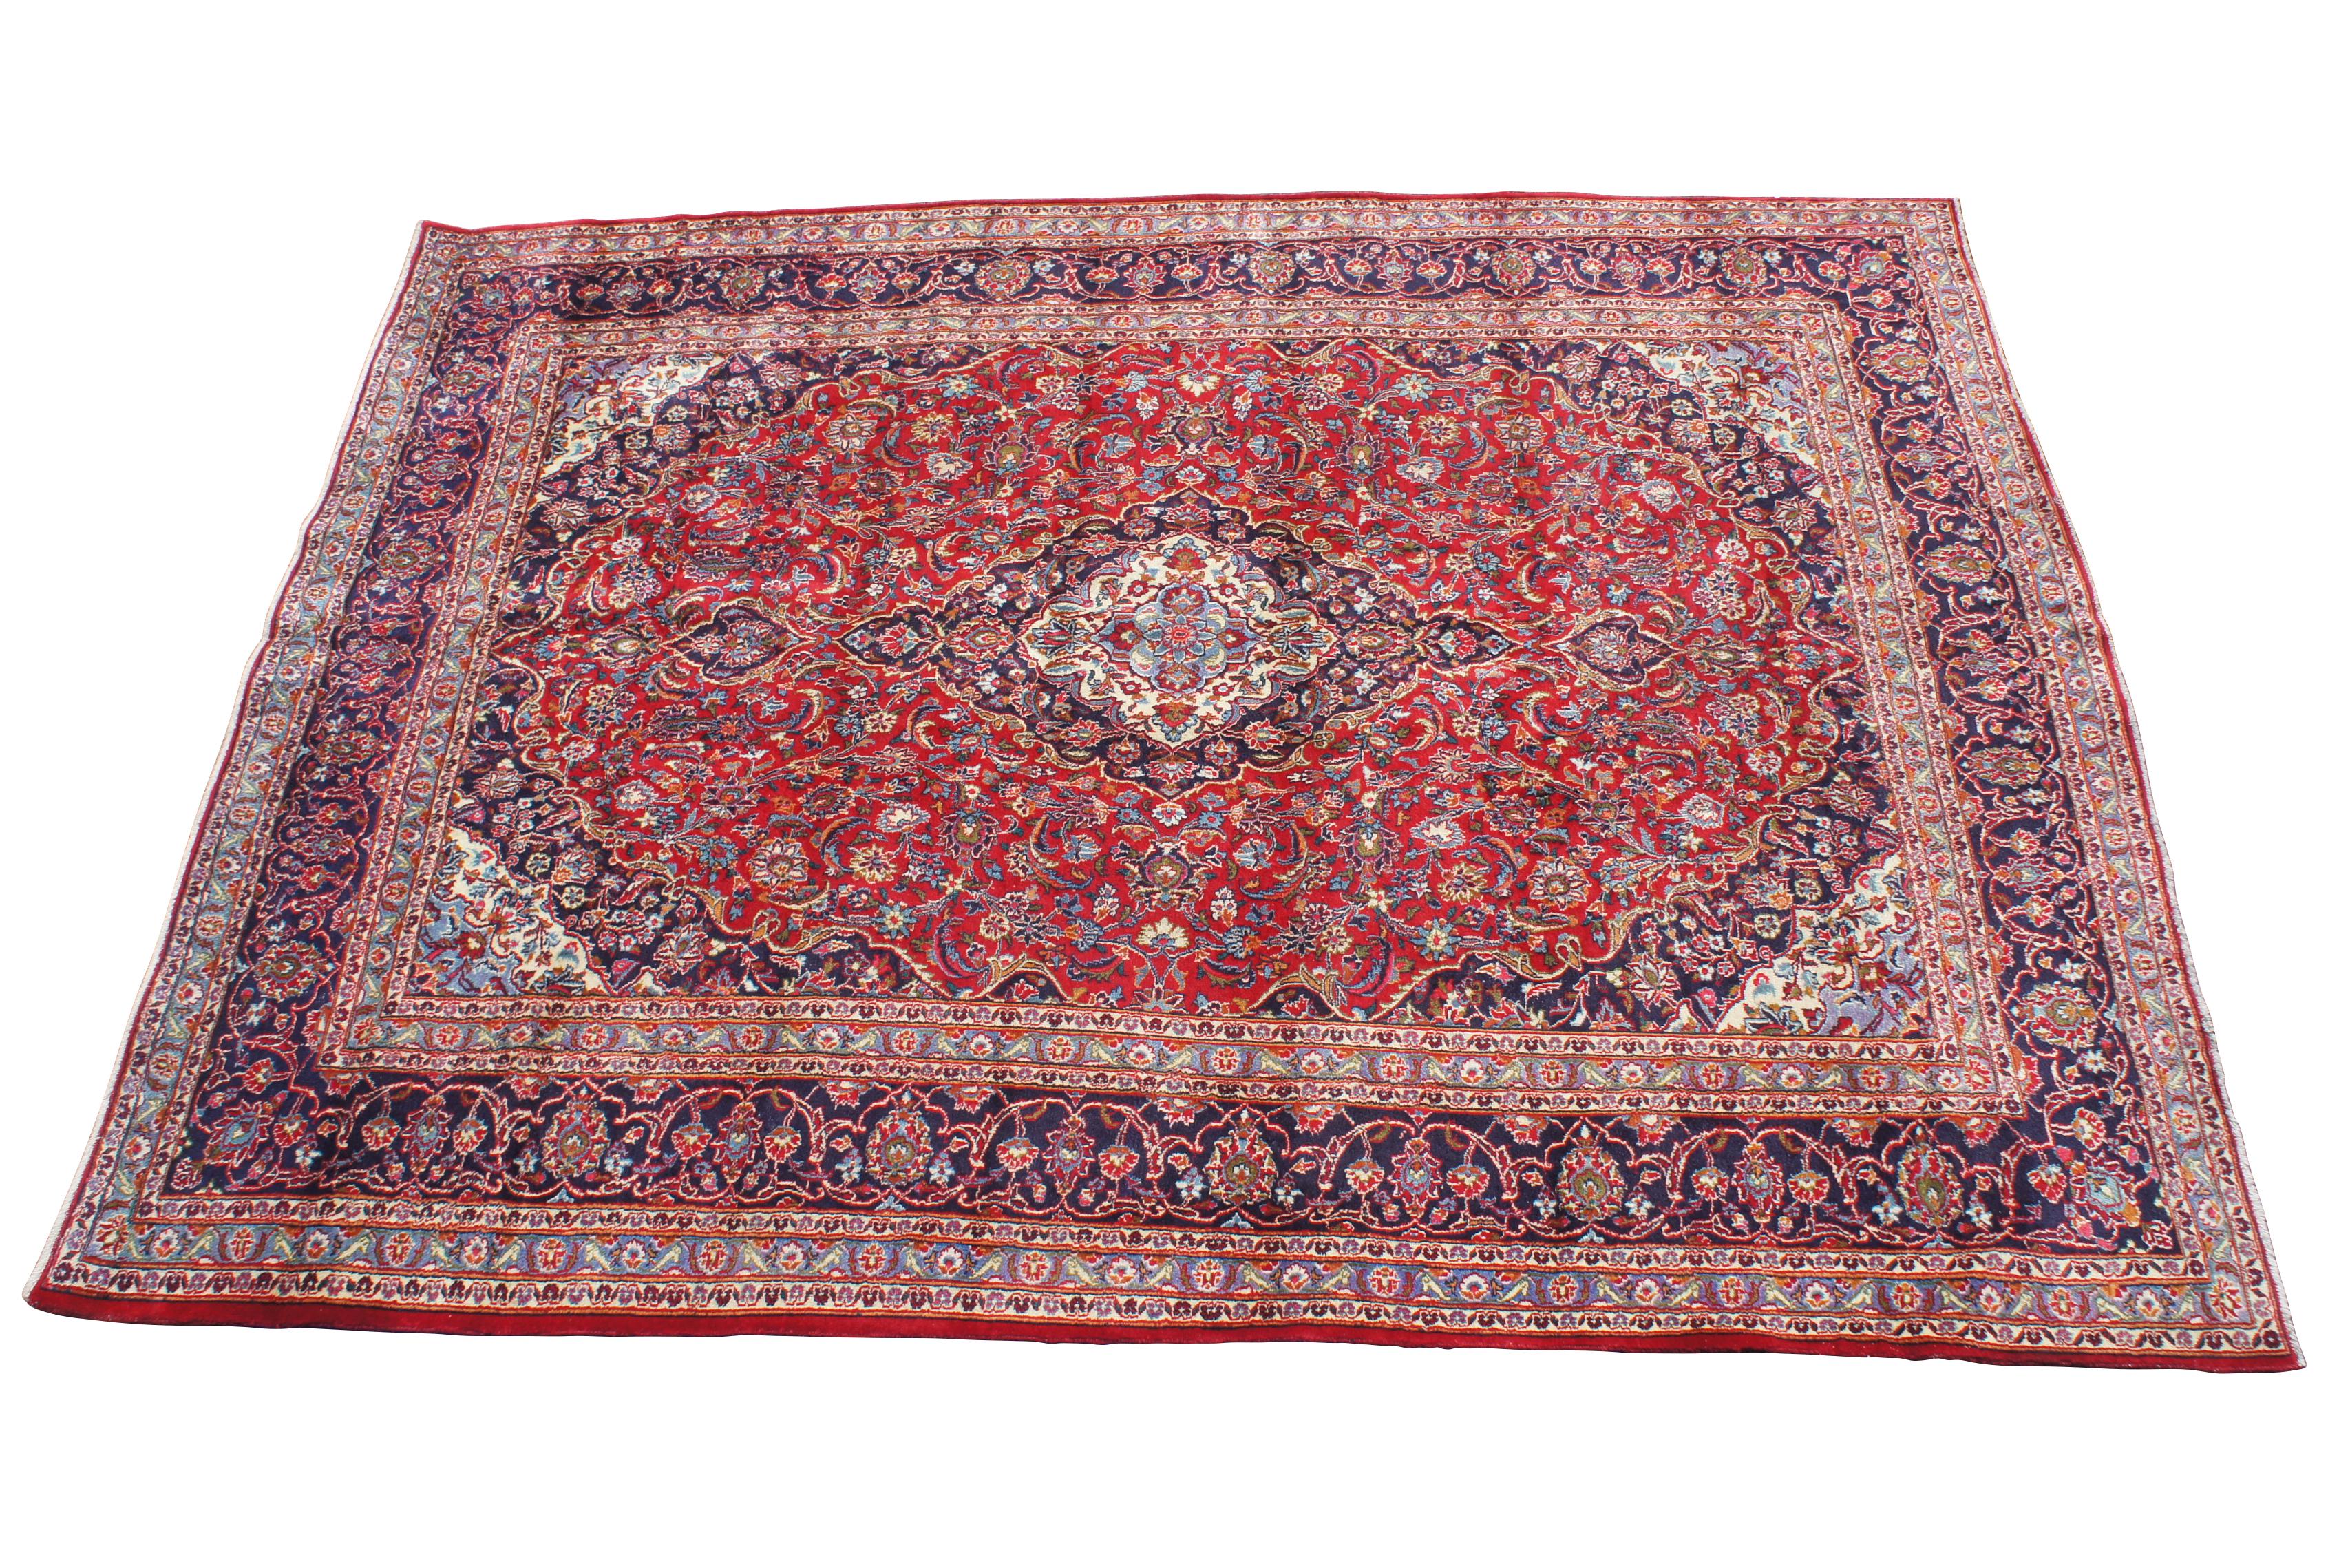 A vibrant mid 20th century Persian Keshan hand knotted wool area rug. Made from 100% wool with a field of red and blue with interlaced floral design. 121-144 knots per square inch 

9' X 12' / 114